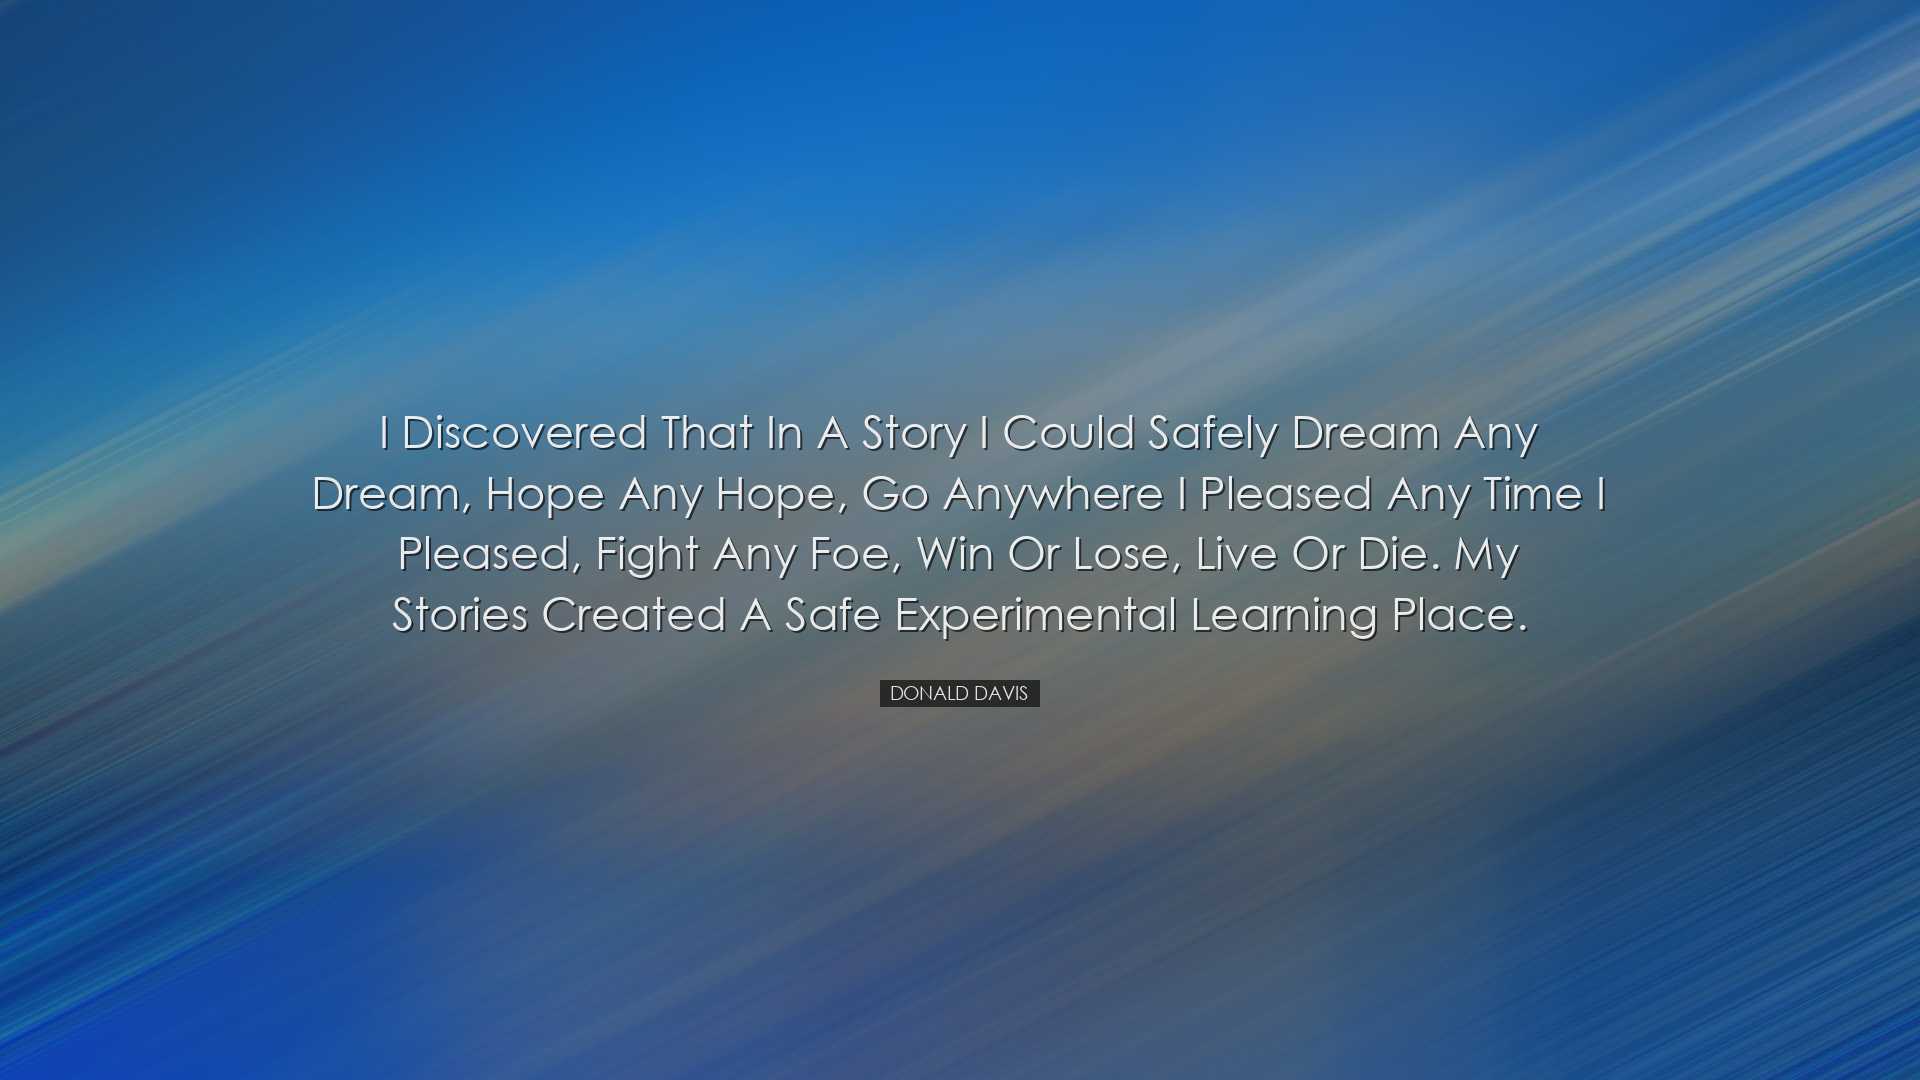 I discovered that in a story I could safely dream any dream, hope